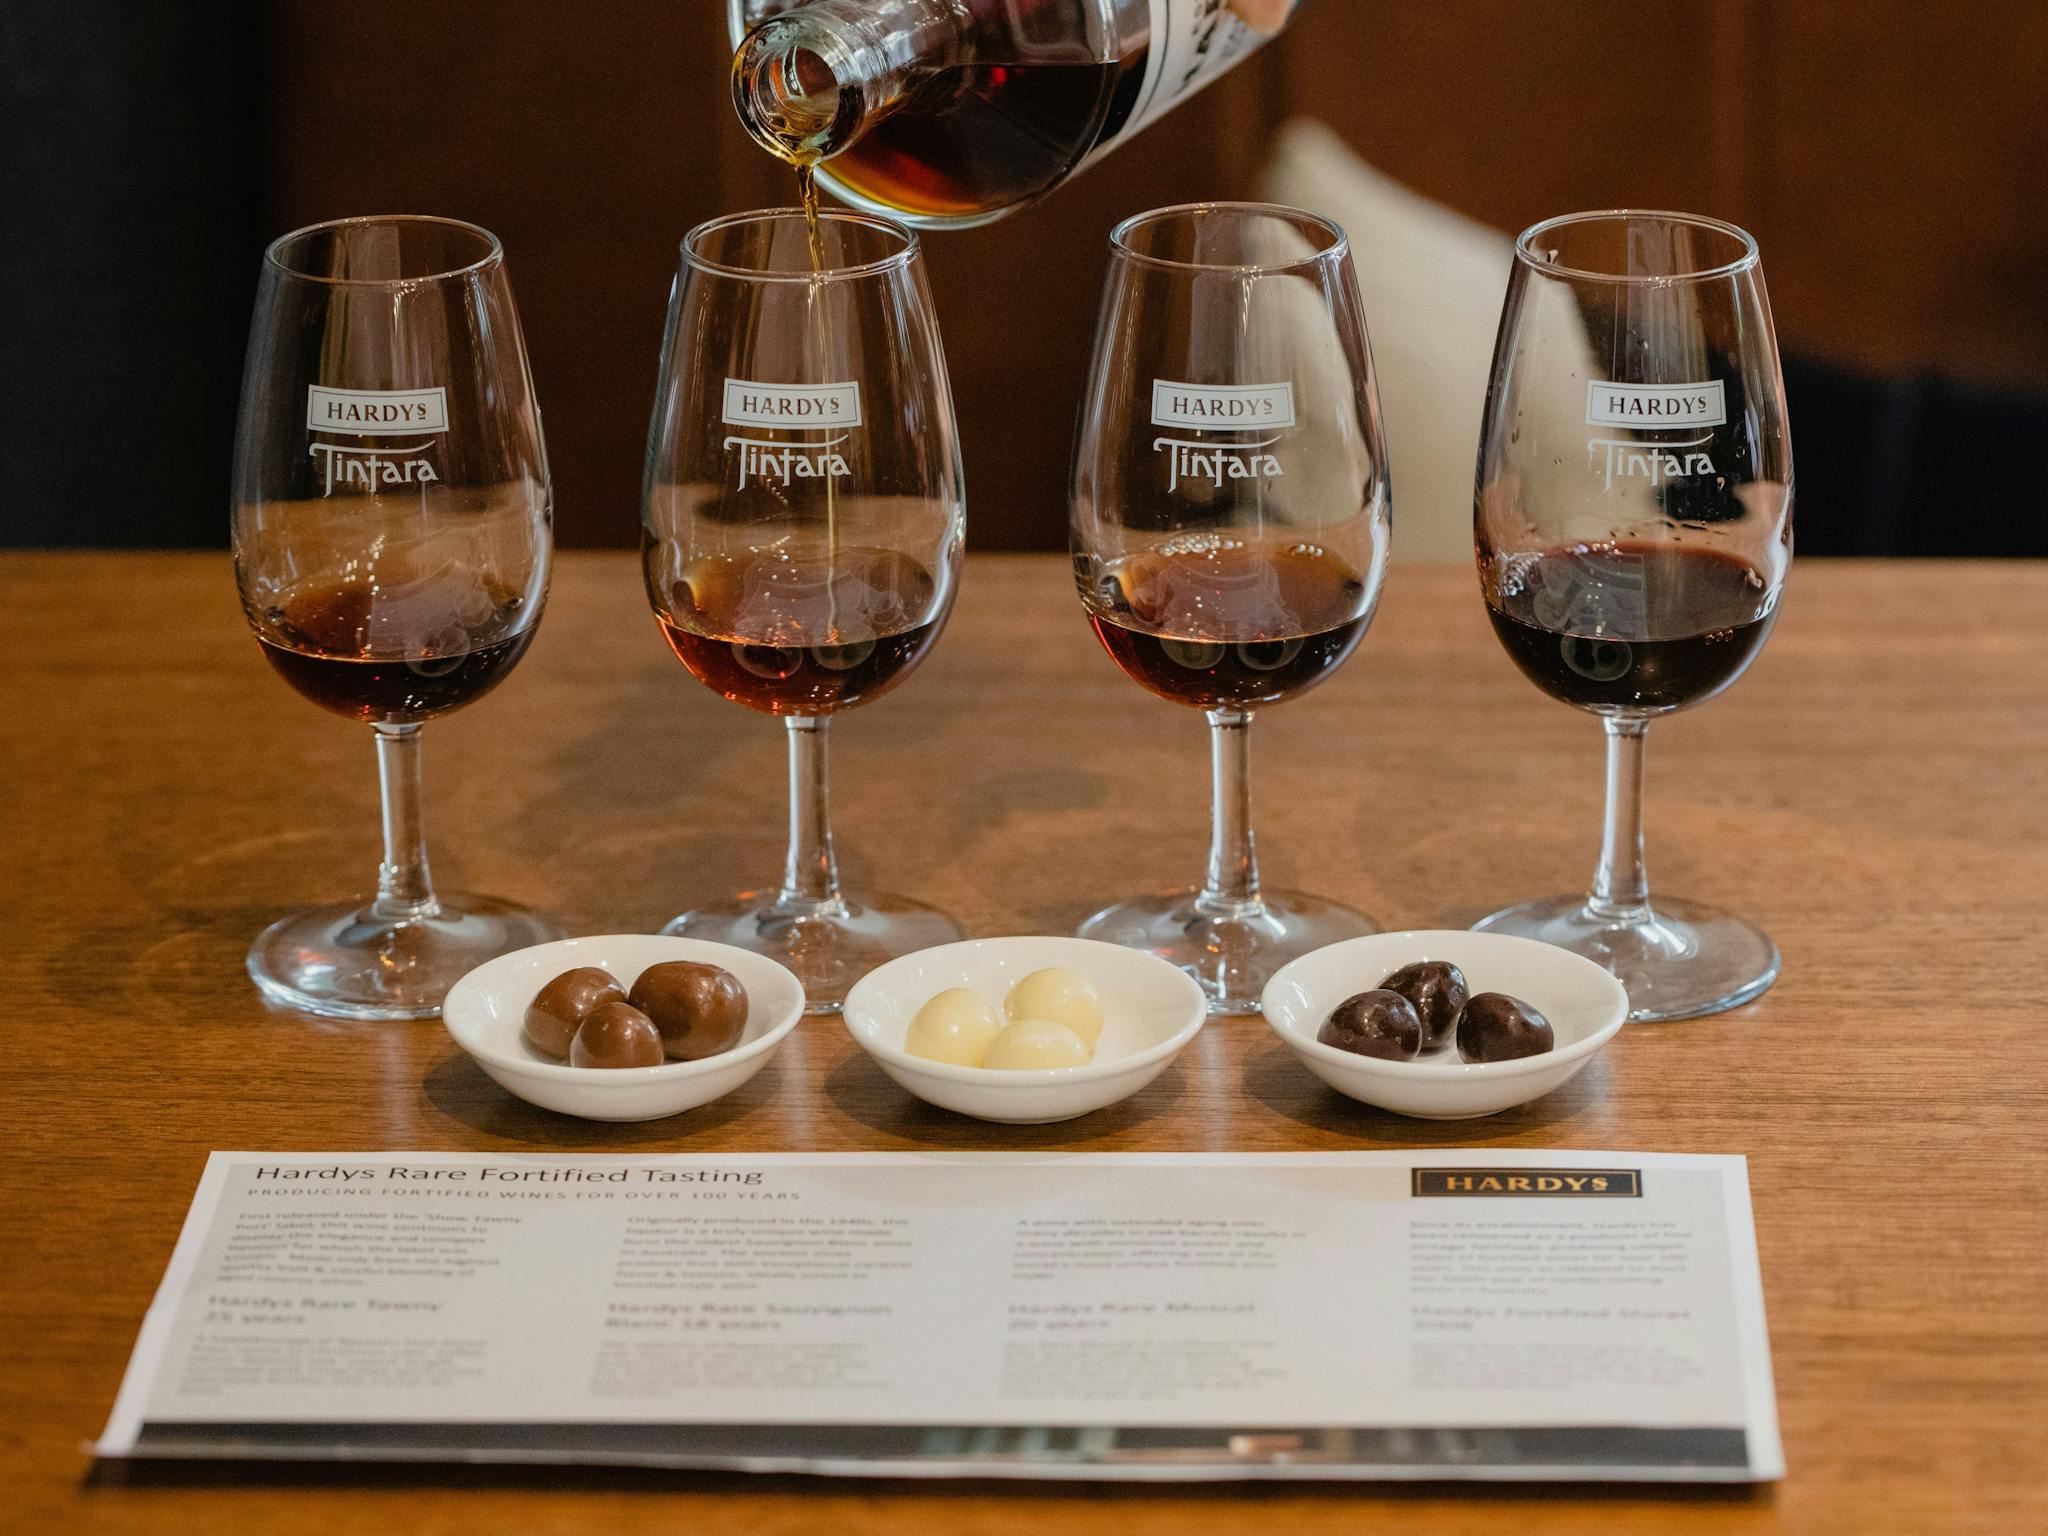 Hardys Rare Fortified Tasting Experience